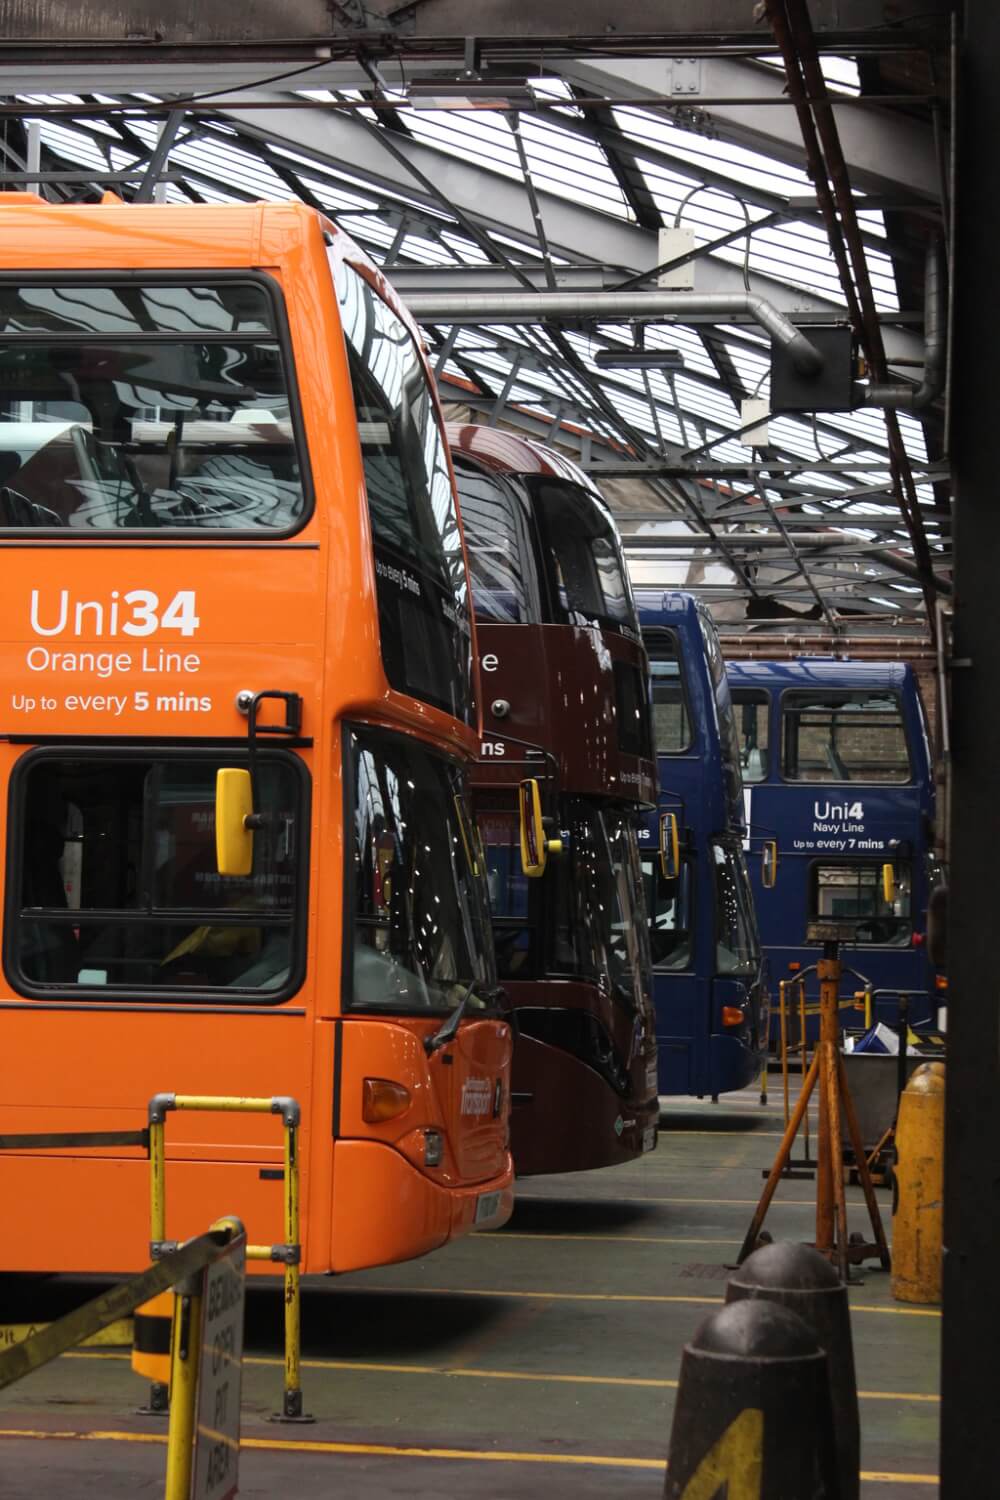 Nottingham City Transport used Baumot systems to breathe new life into some of its older vehicles. PETER JACKSON